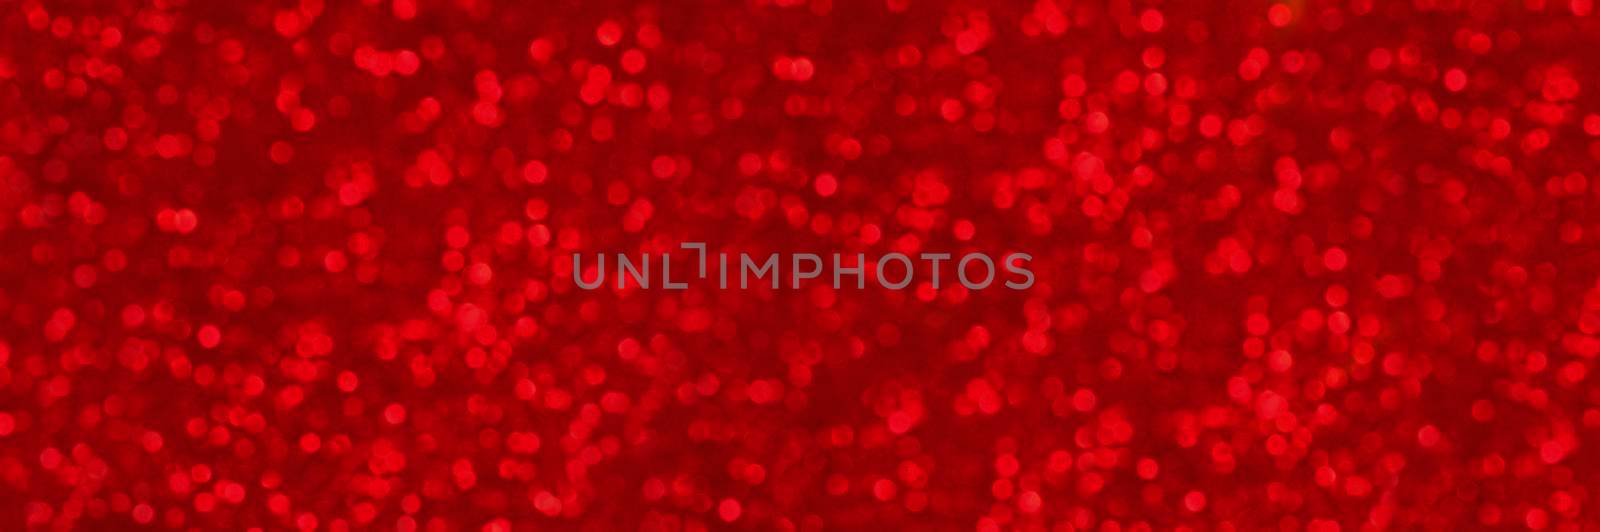 Abstract shiny glitter christmas or new year background. Ruby glitter background with sparkling texture. Red shimmering light, sequins sparks and glittering glow foil background. Long banner or poster